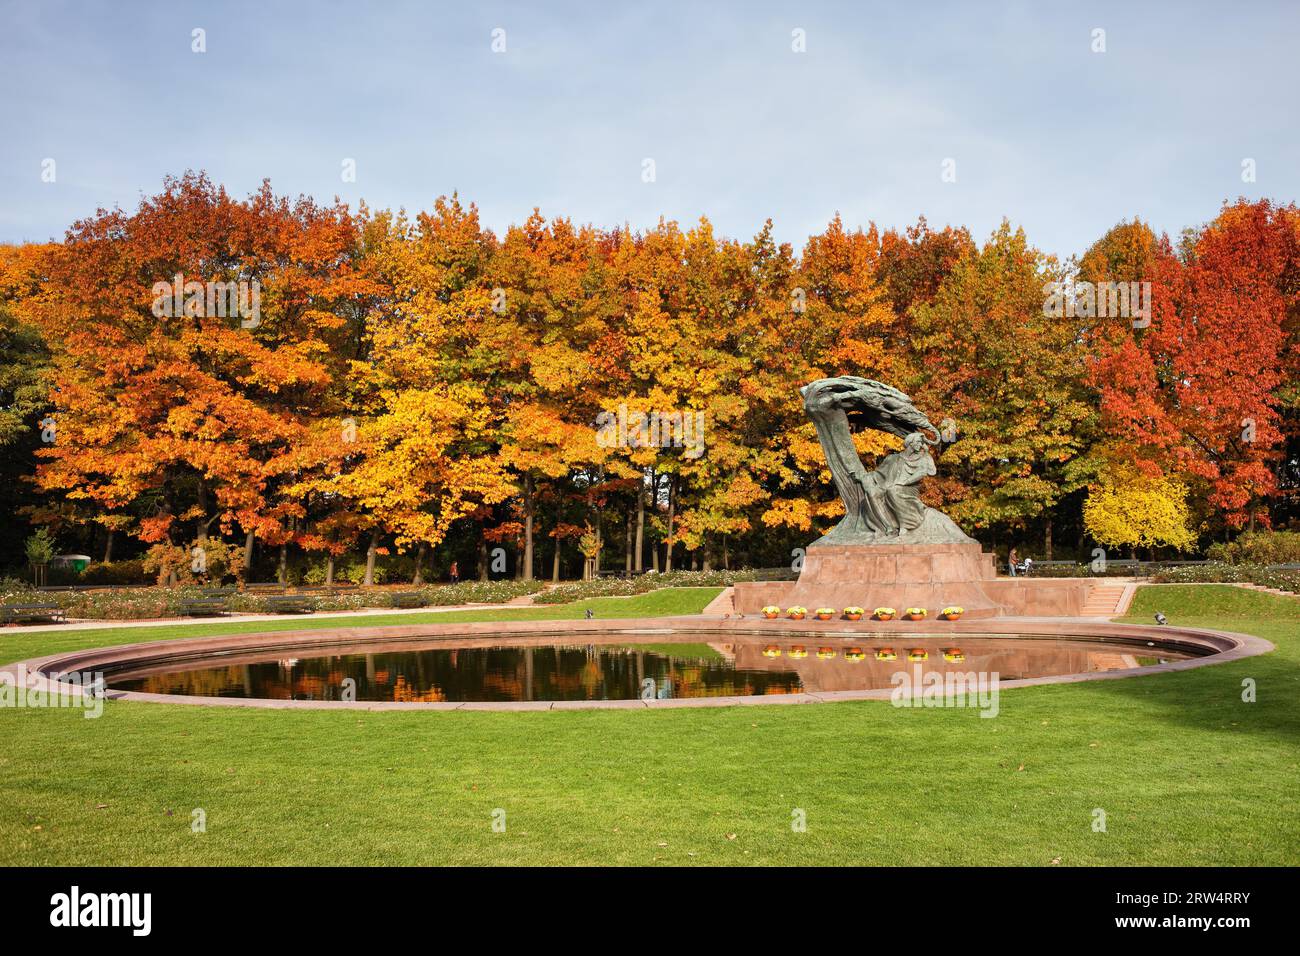 Fryderyk Chopin monument and pond in autumn Royal Lazienki Park in Warsaw, Poland Stock Photo